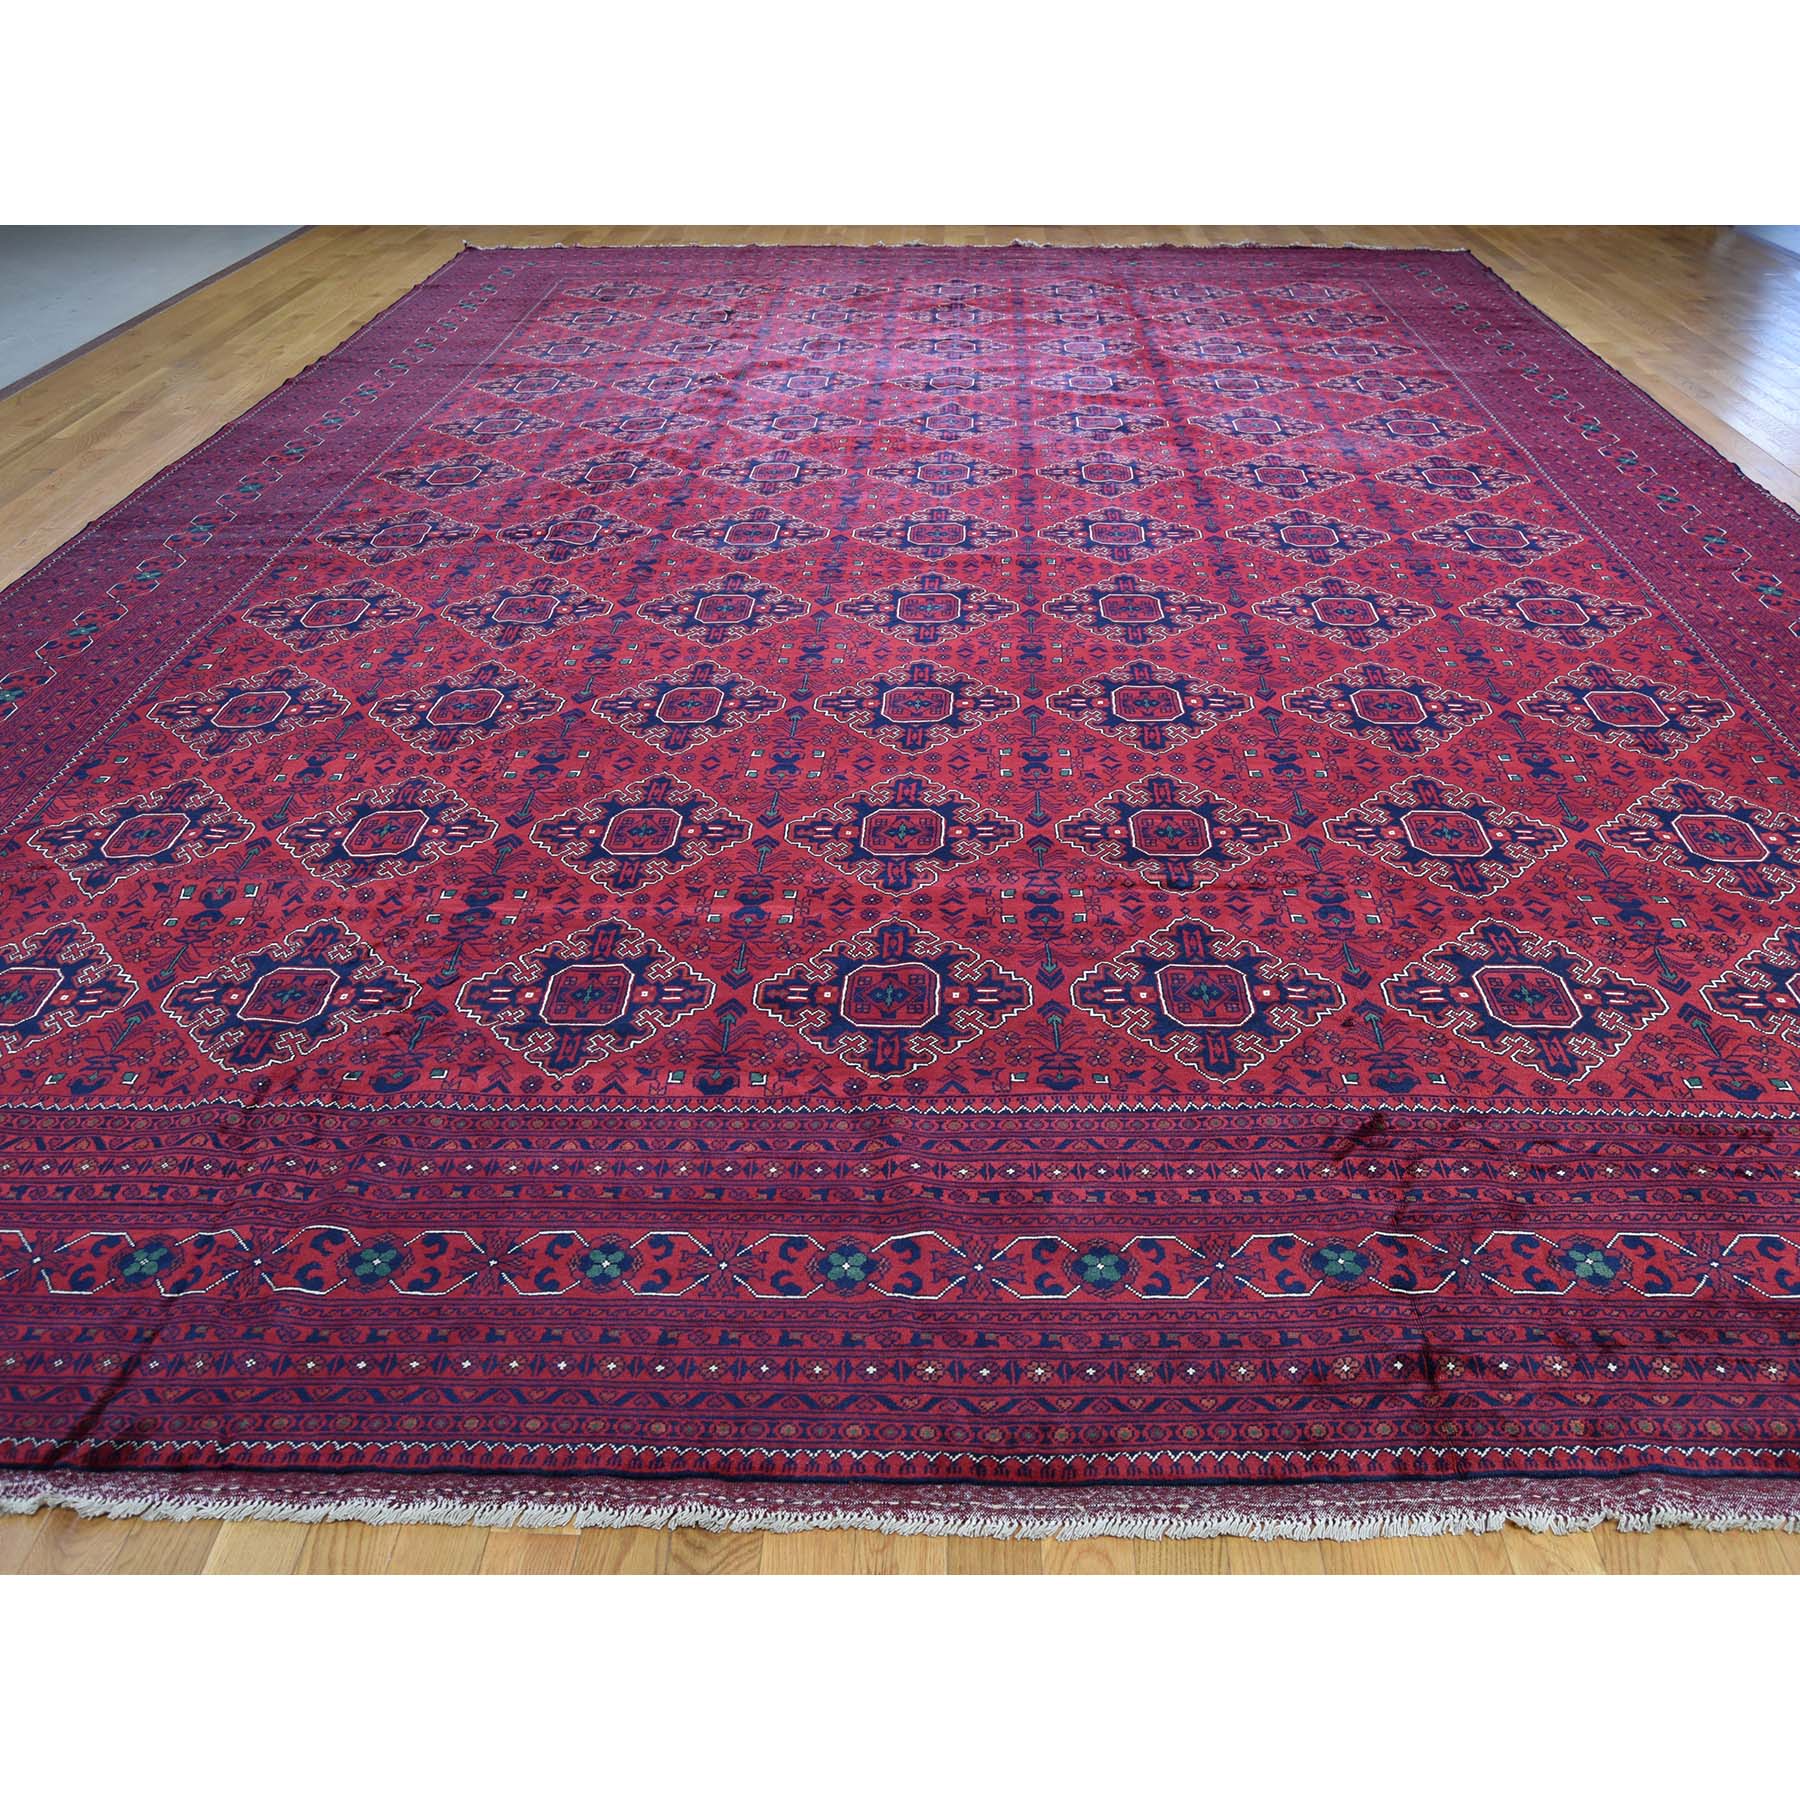 13-1 x19-8  Mansion Size Afghan Khamyab Pure Wool Hand Knotted Oriental Rug 